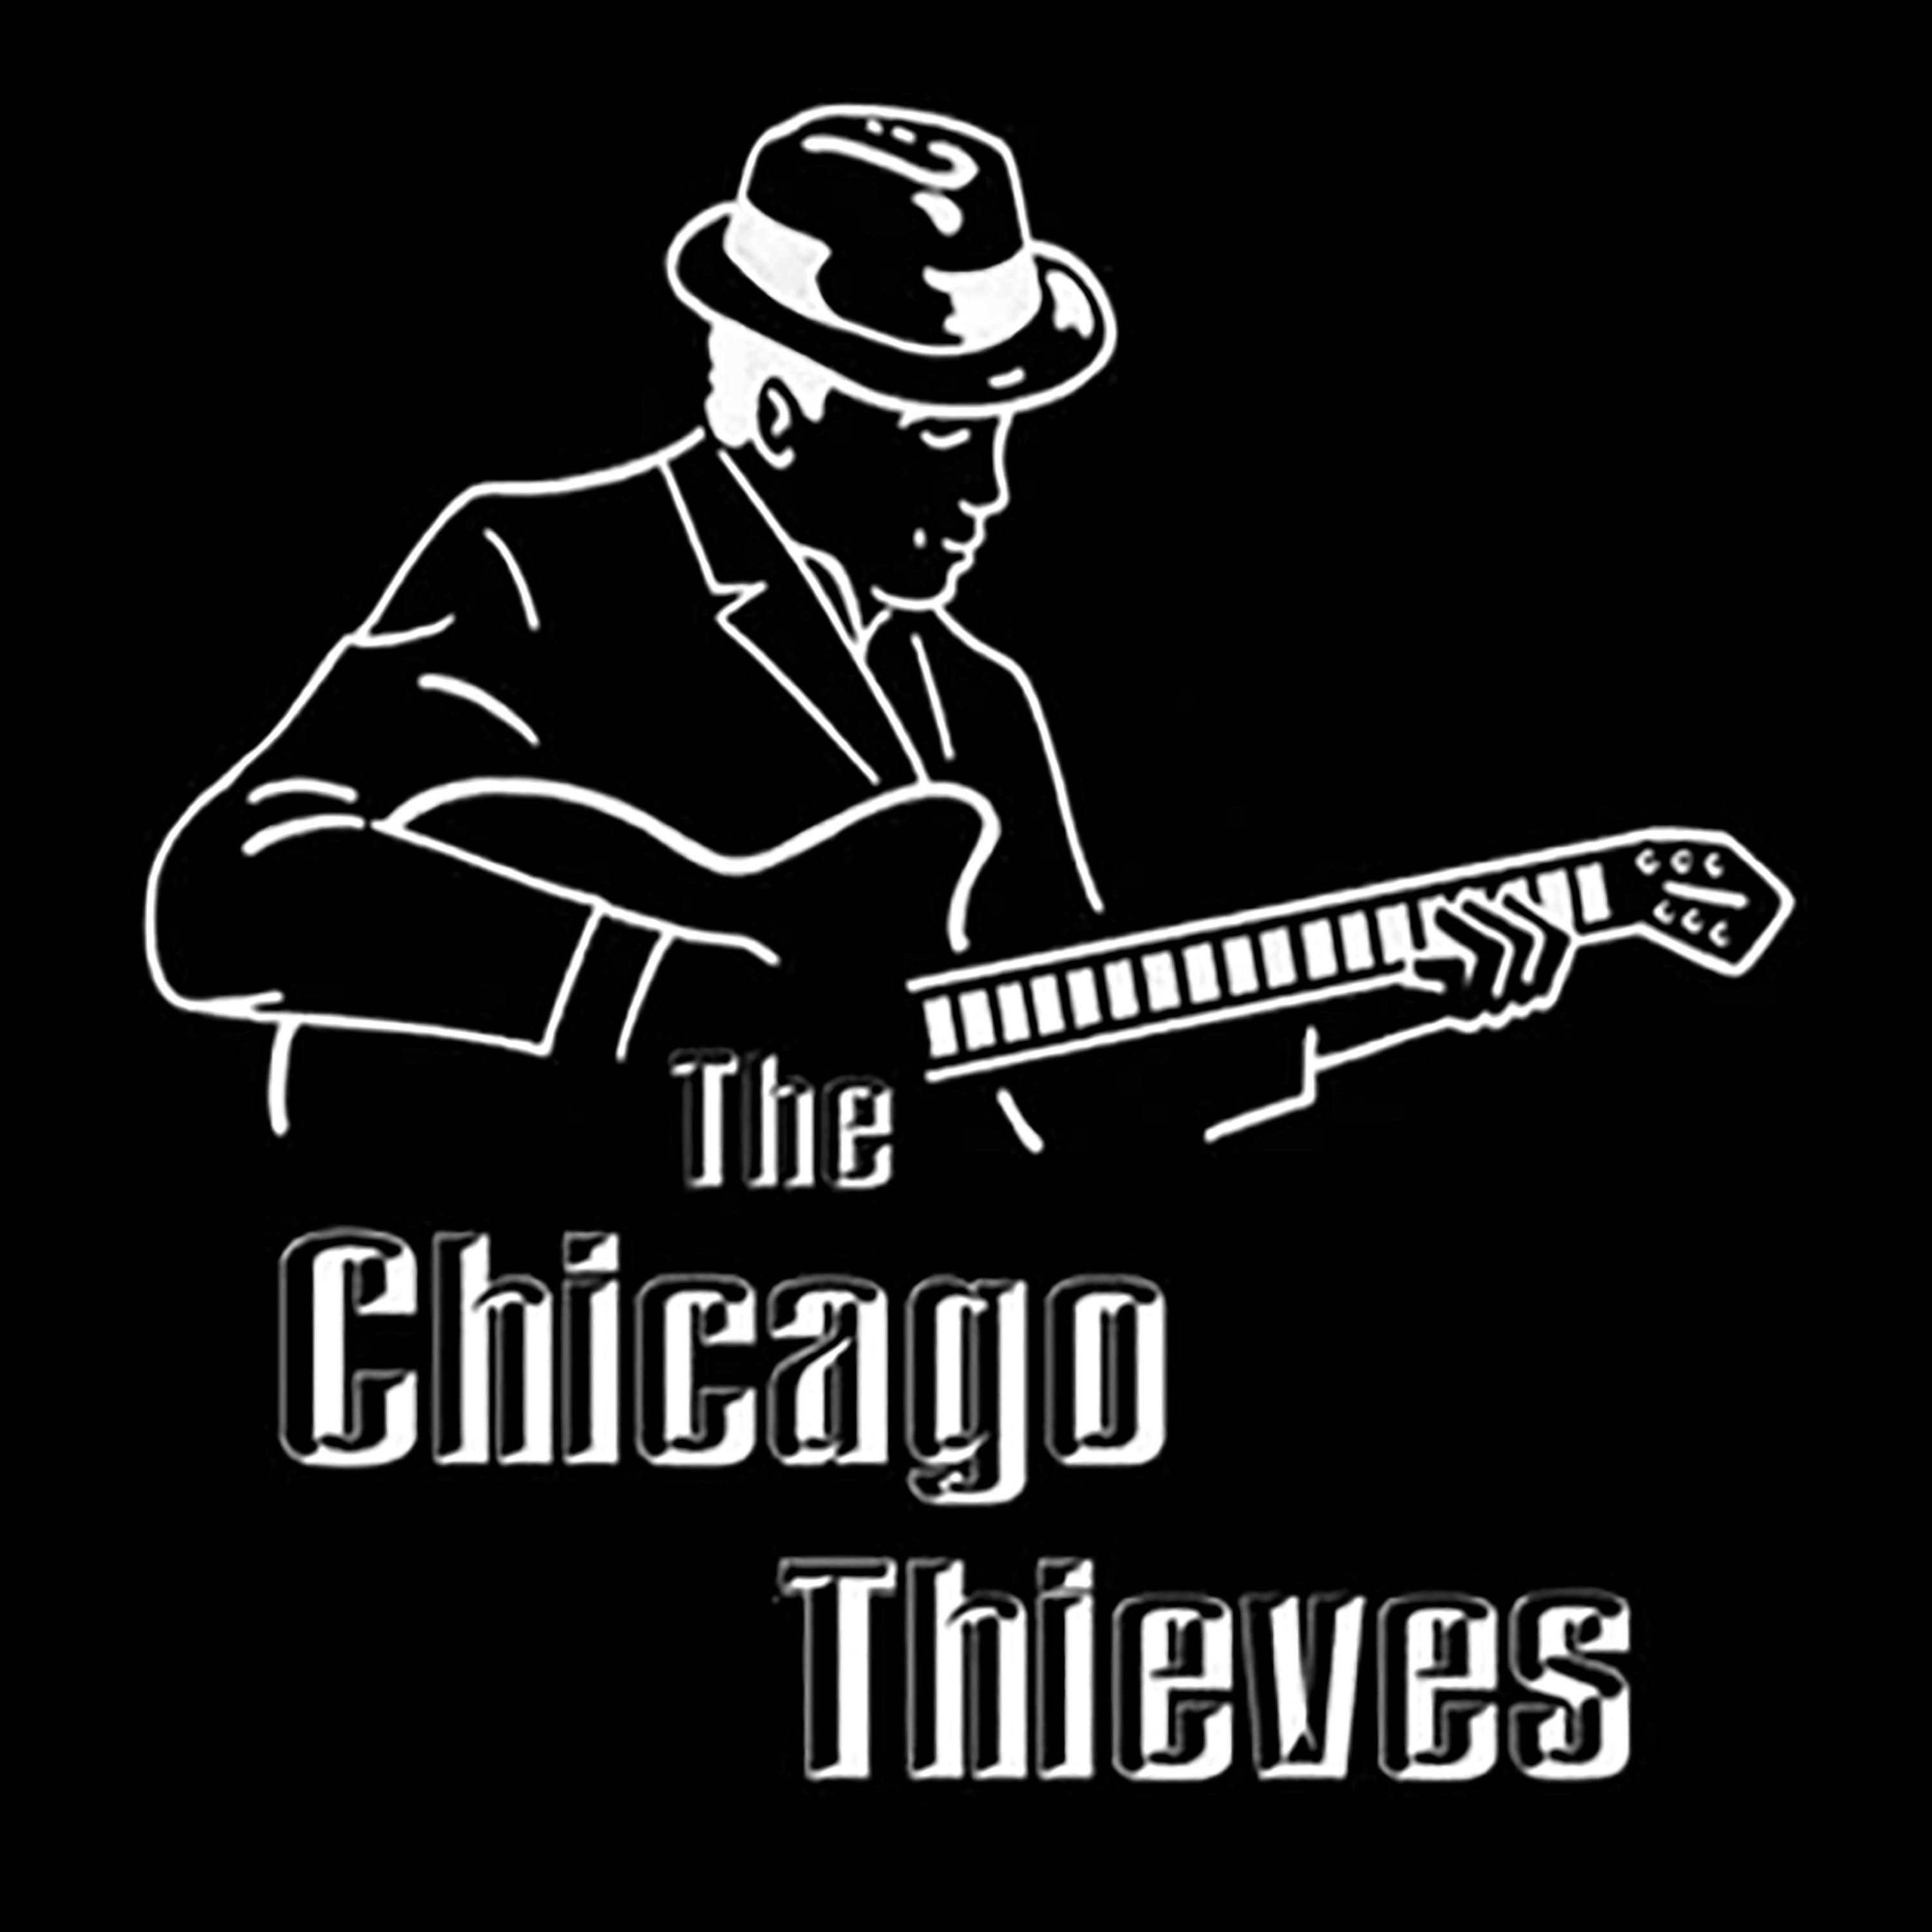 The Chicago Thieves